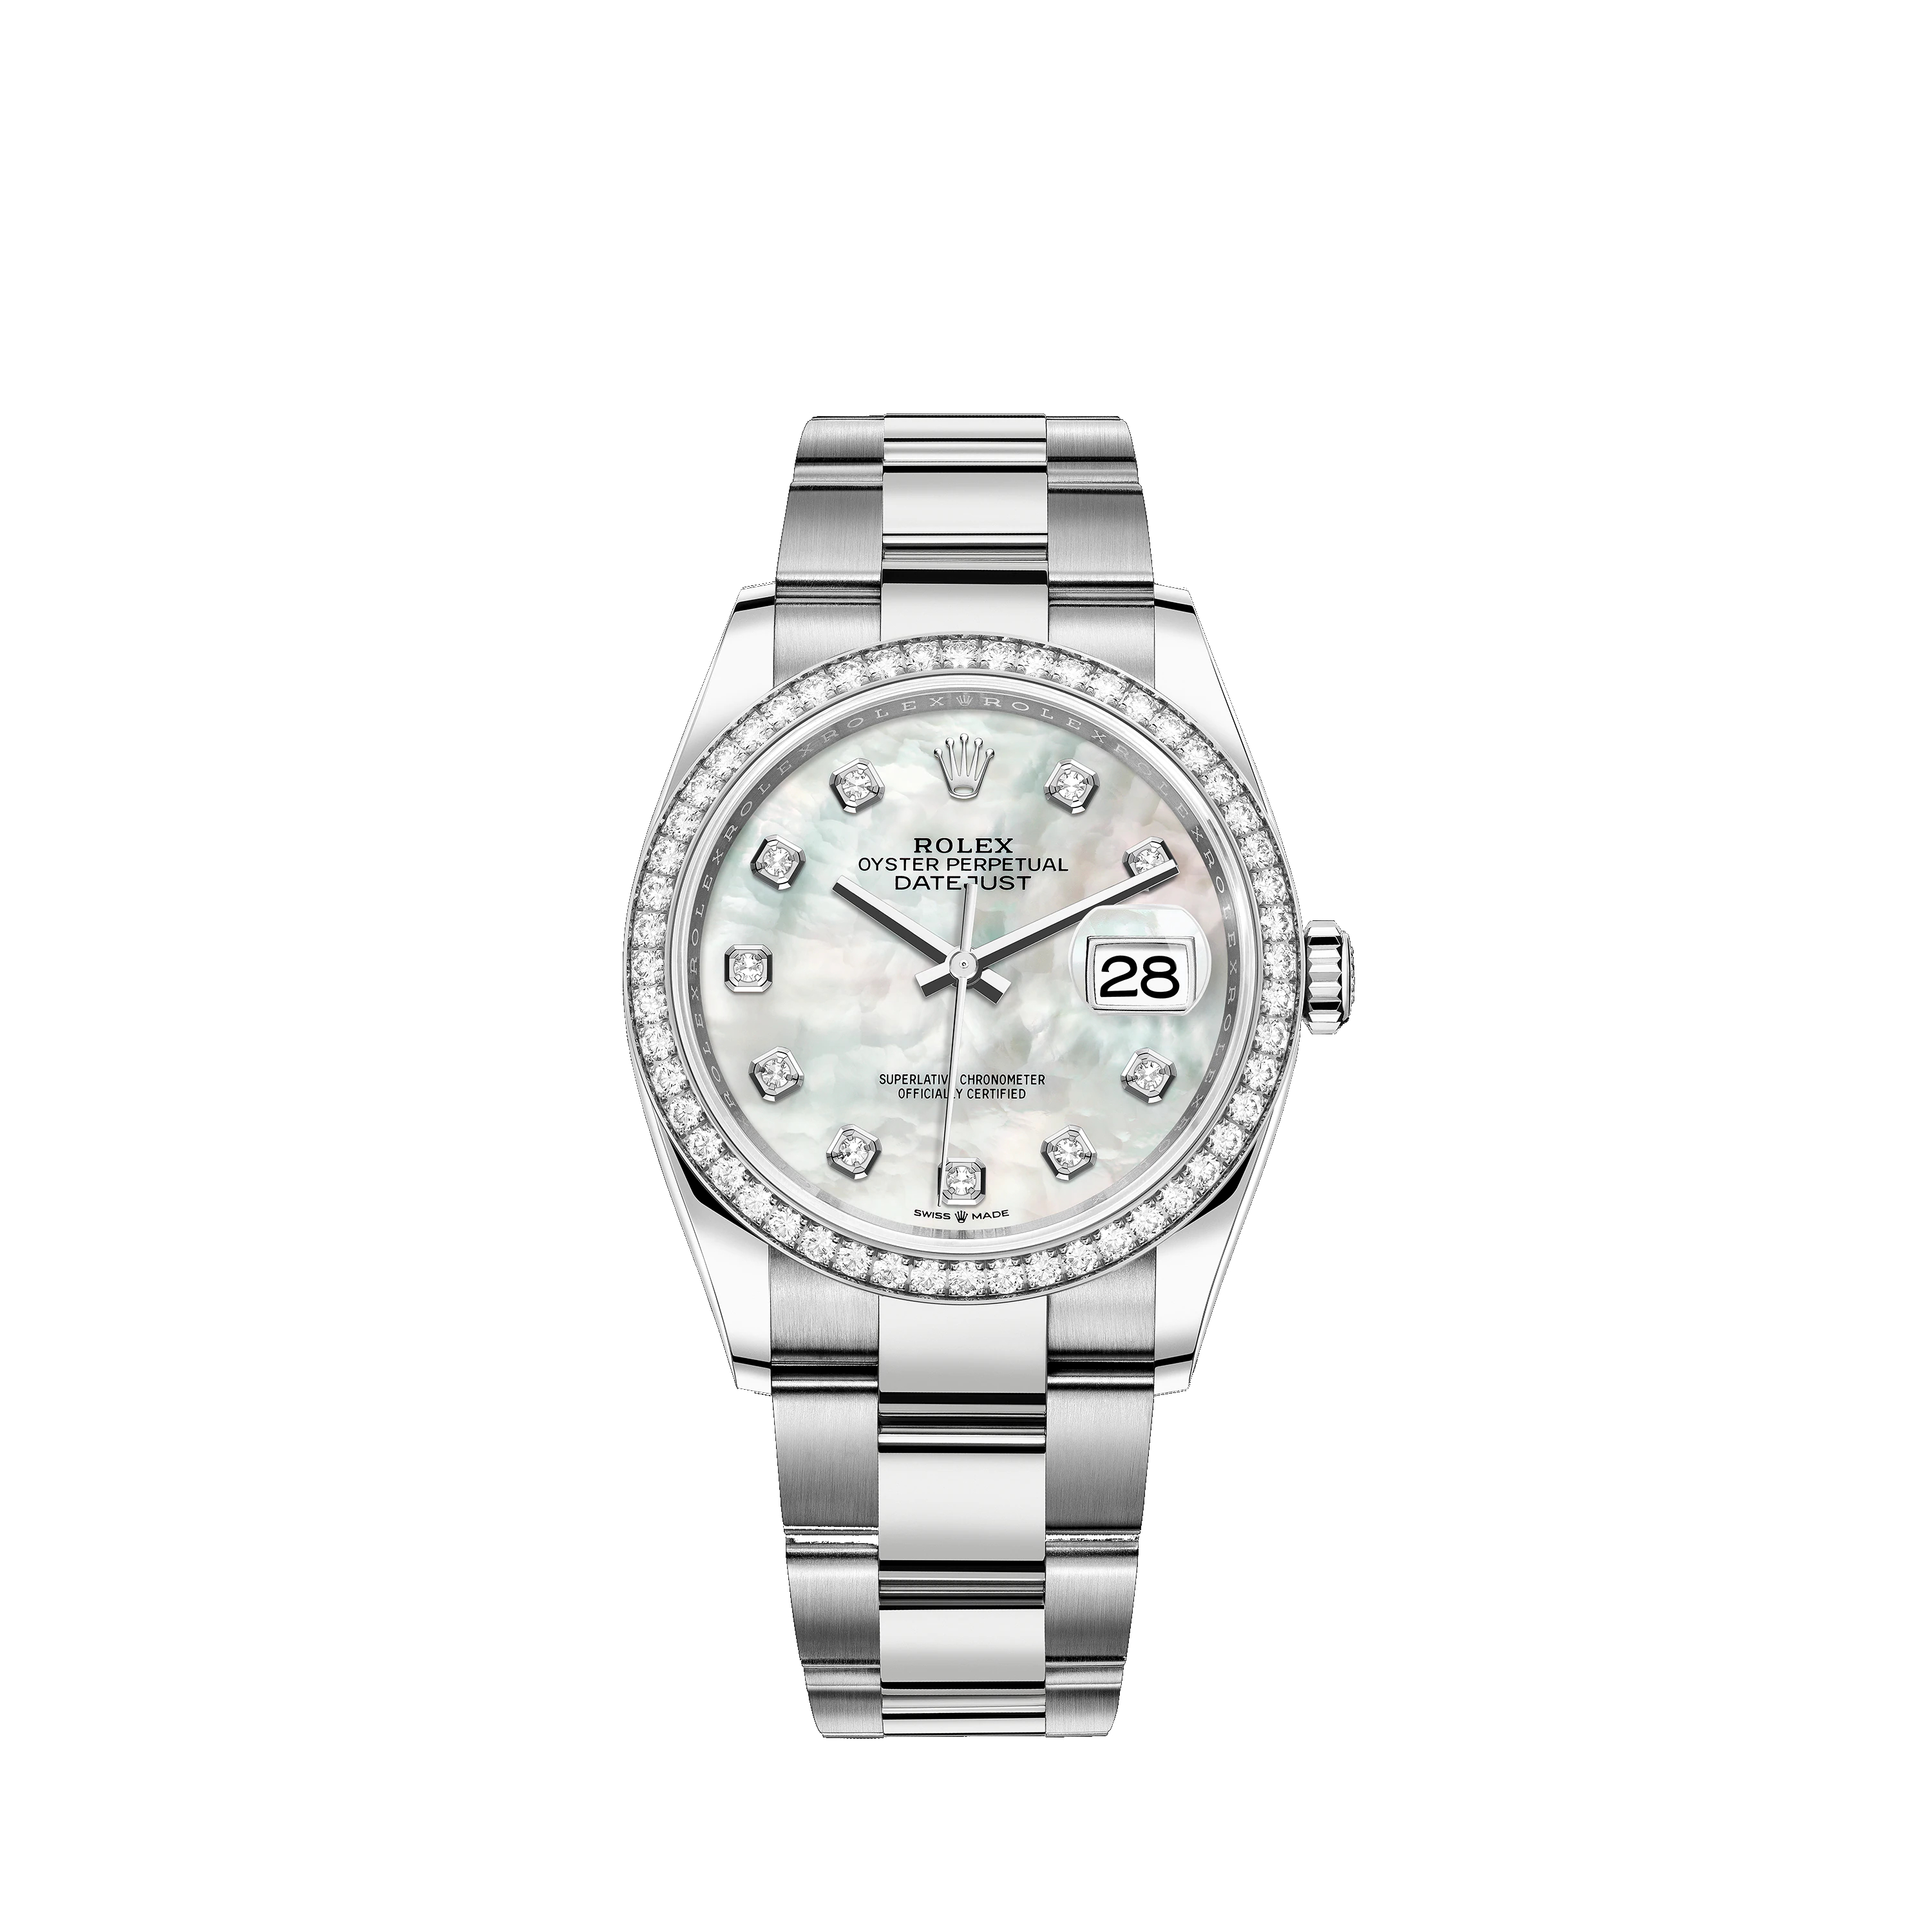 Datejust 36 126284RBR White Gold, Stainless Steel & Diamonds Watch (White Mother-of-Pearl Set with Diamonds) - Click Image to Close